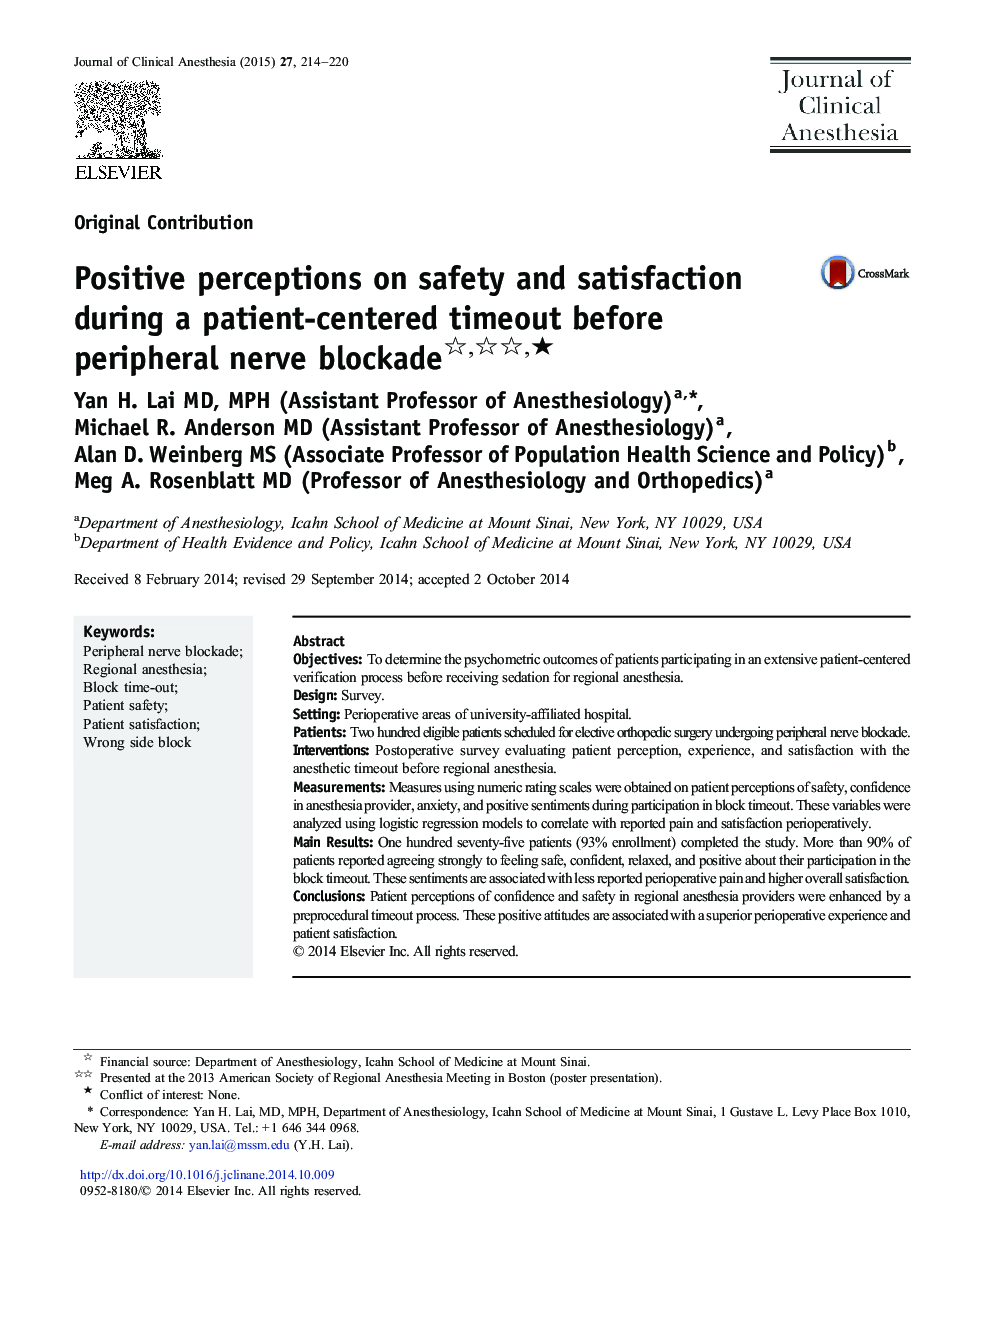 Positive perceptions on safety and satisfaction during a patient-centered timeout before peripheral nerve blockade ★